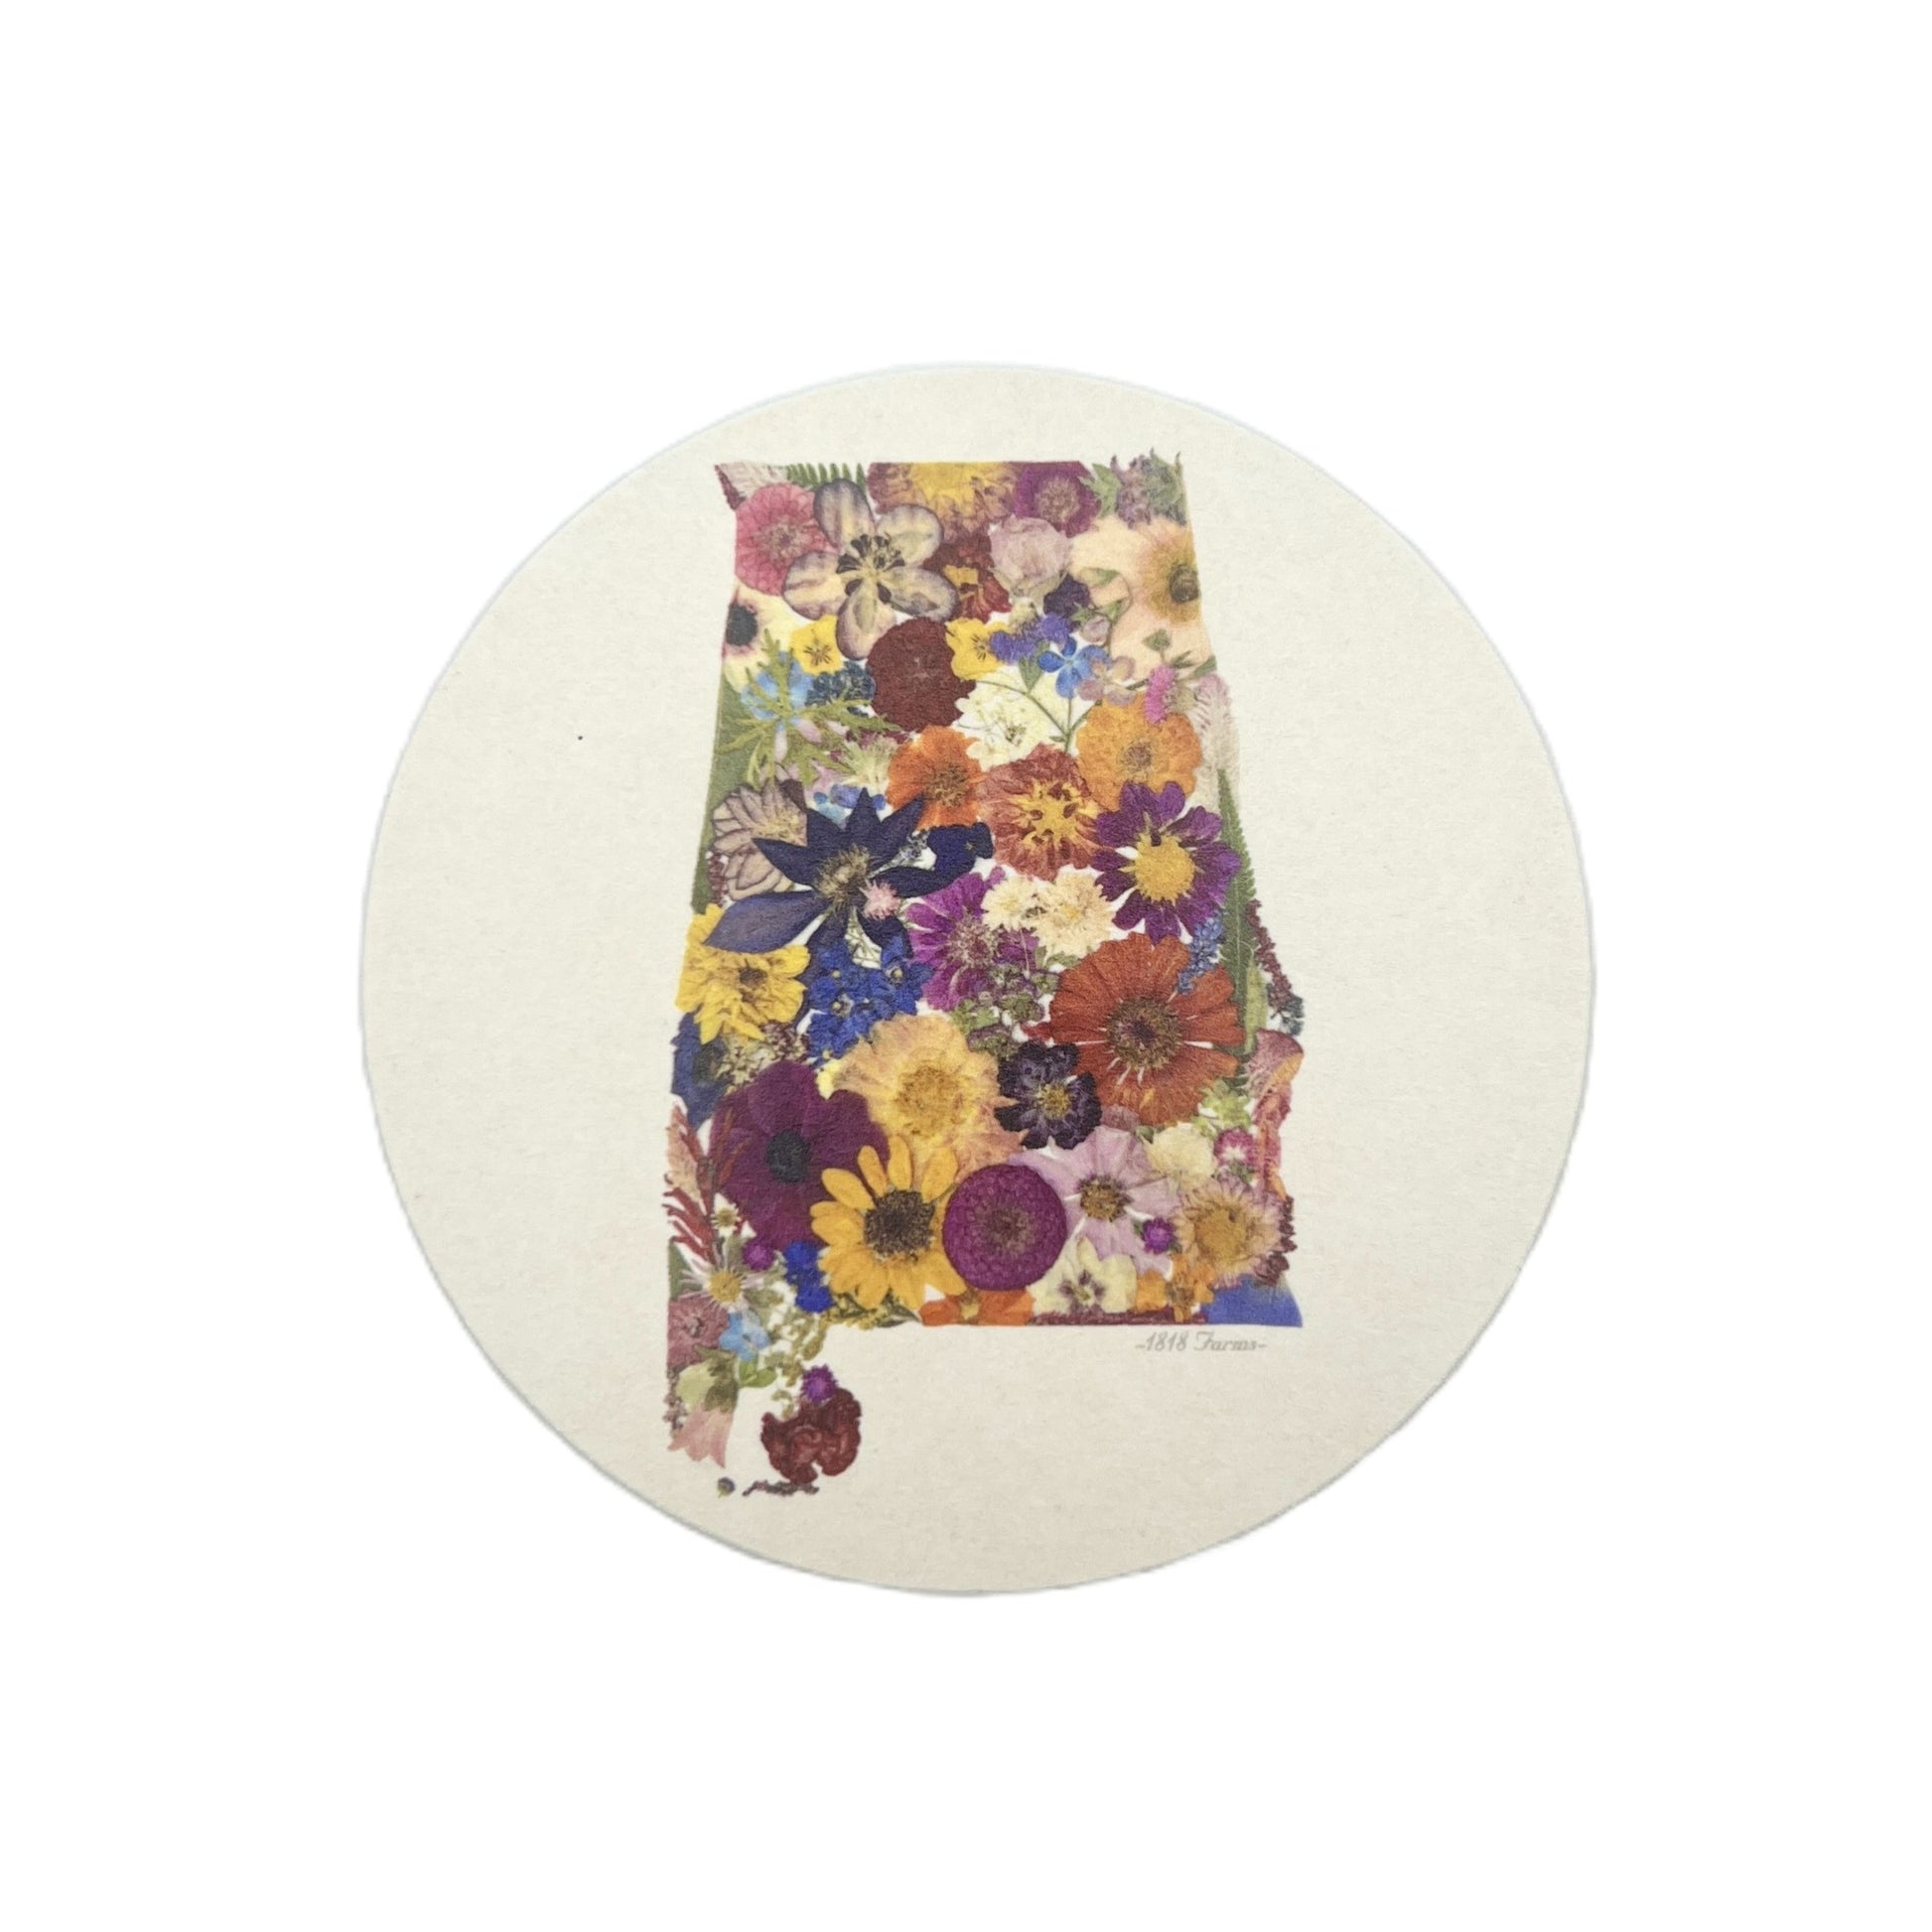 Alabama Themed Coasters (Set of 6) Featuring Dried, Pressed Flowers - "Where I Bloom" Collection Coaster 1818 Farms   